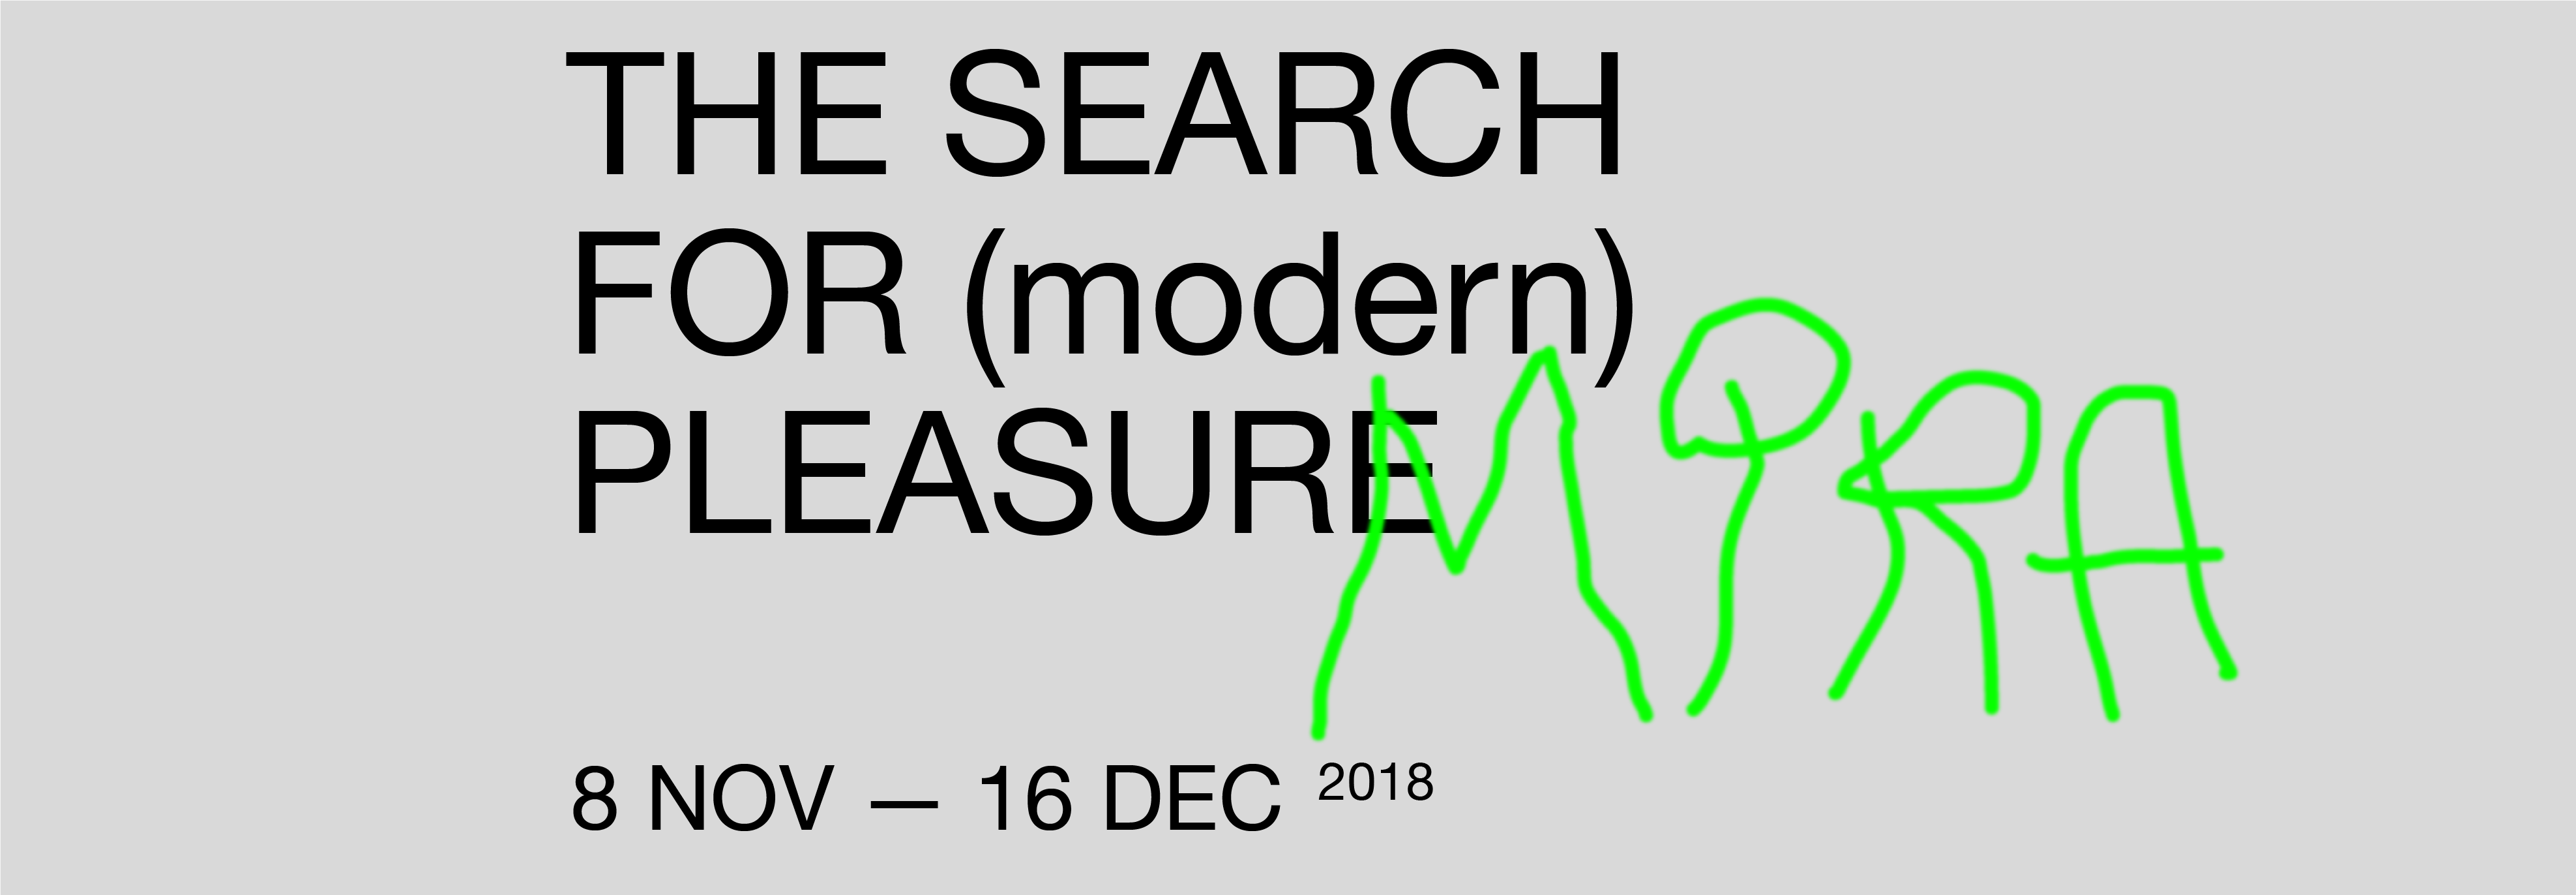 The search for (modern) pleasure